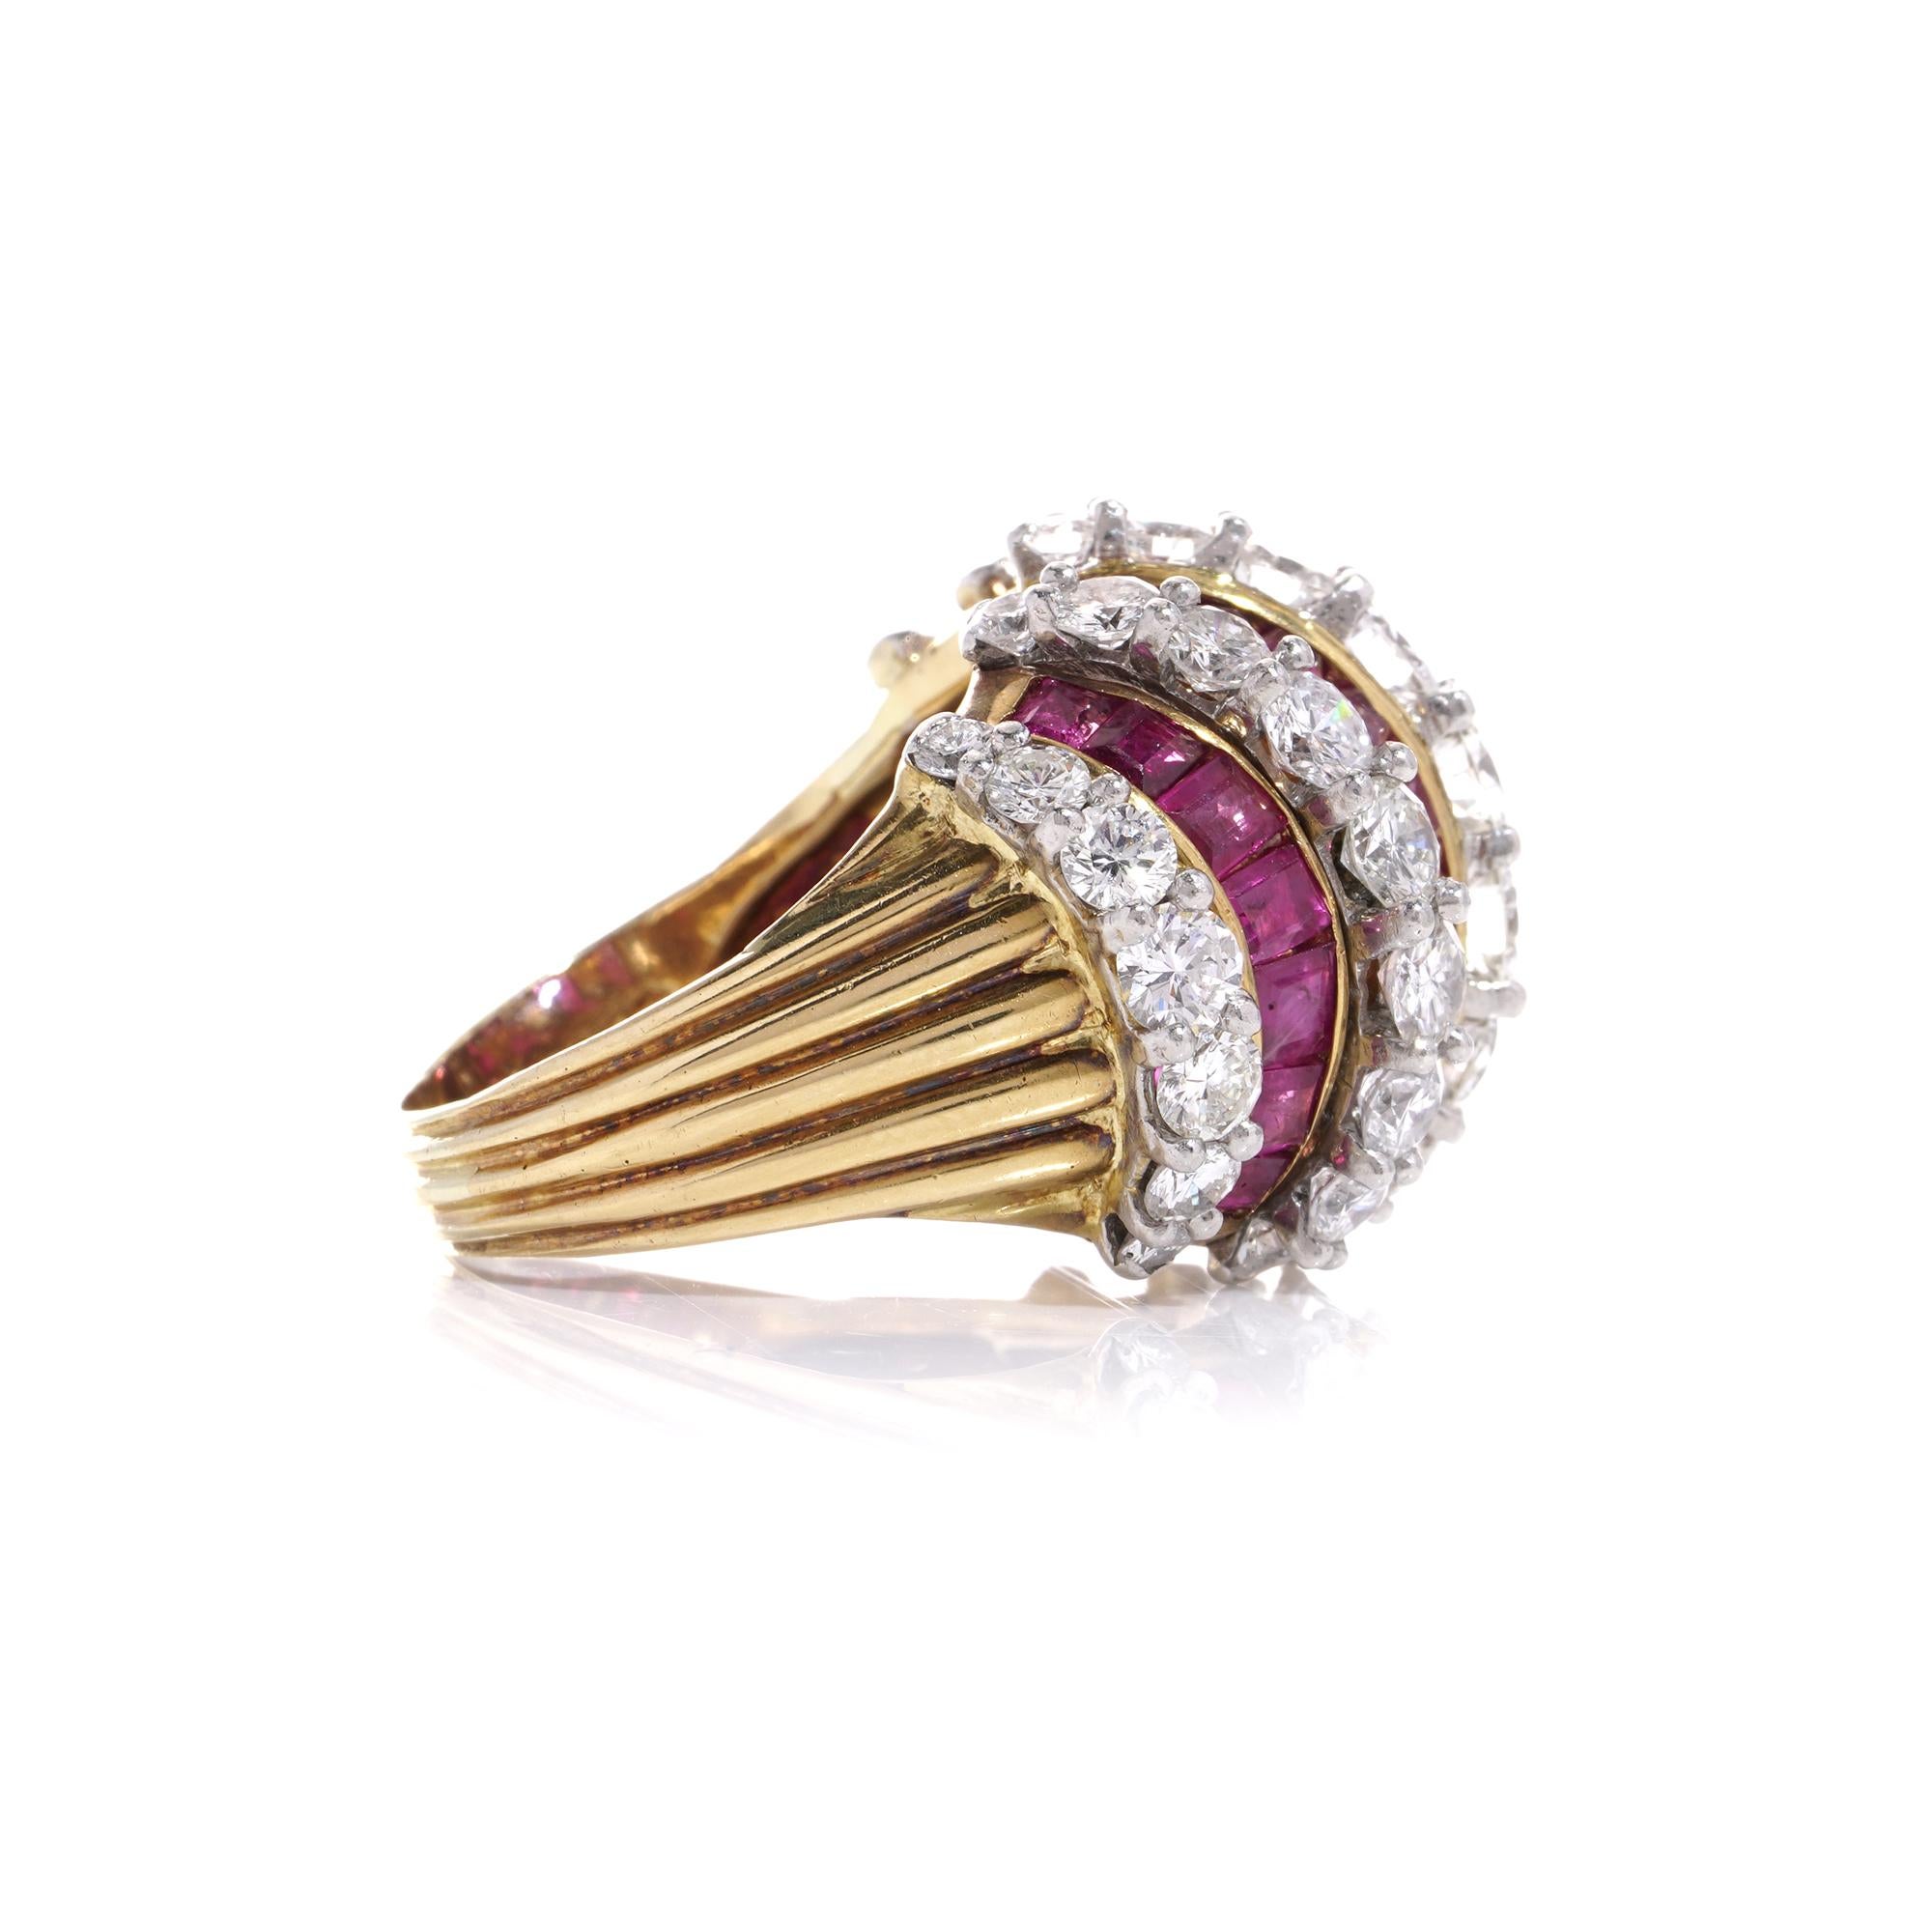 Kutchinsky 18kt. gold ladies dome ring with diamonds and rubies For Sale 1